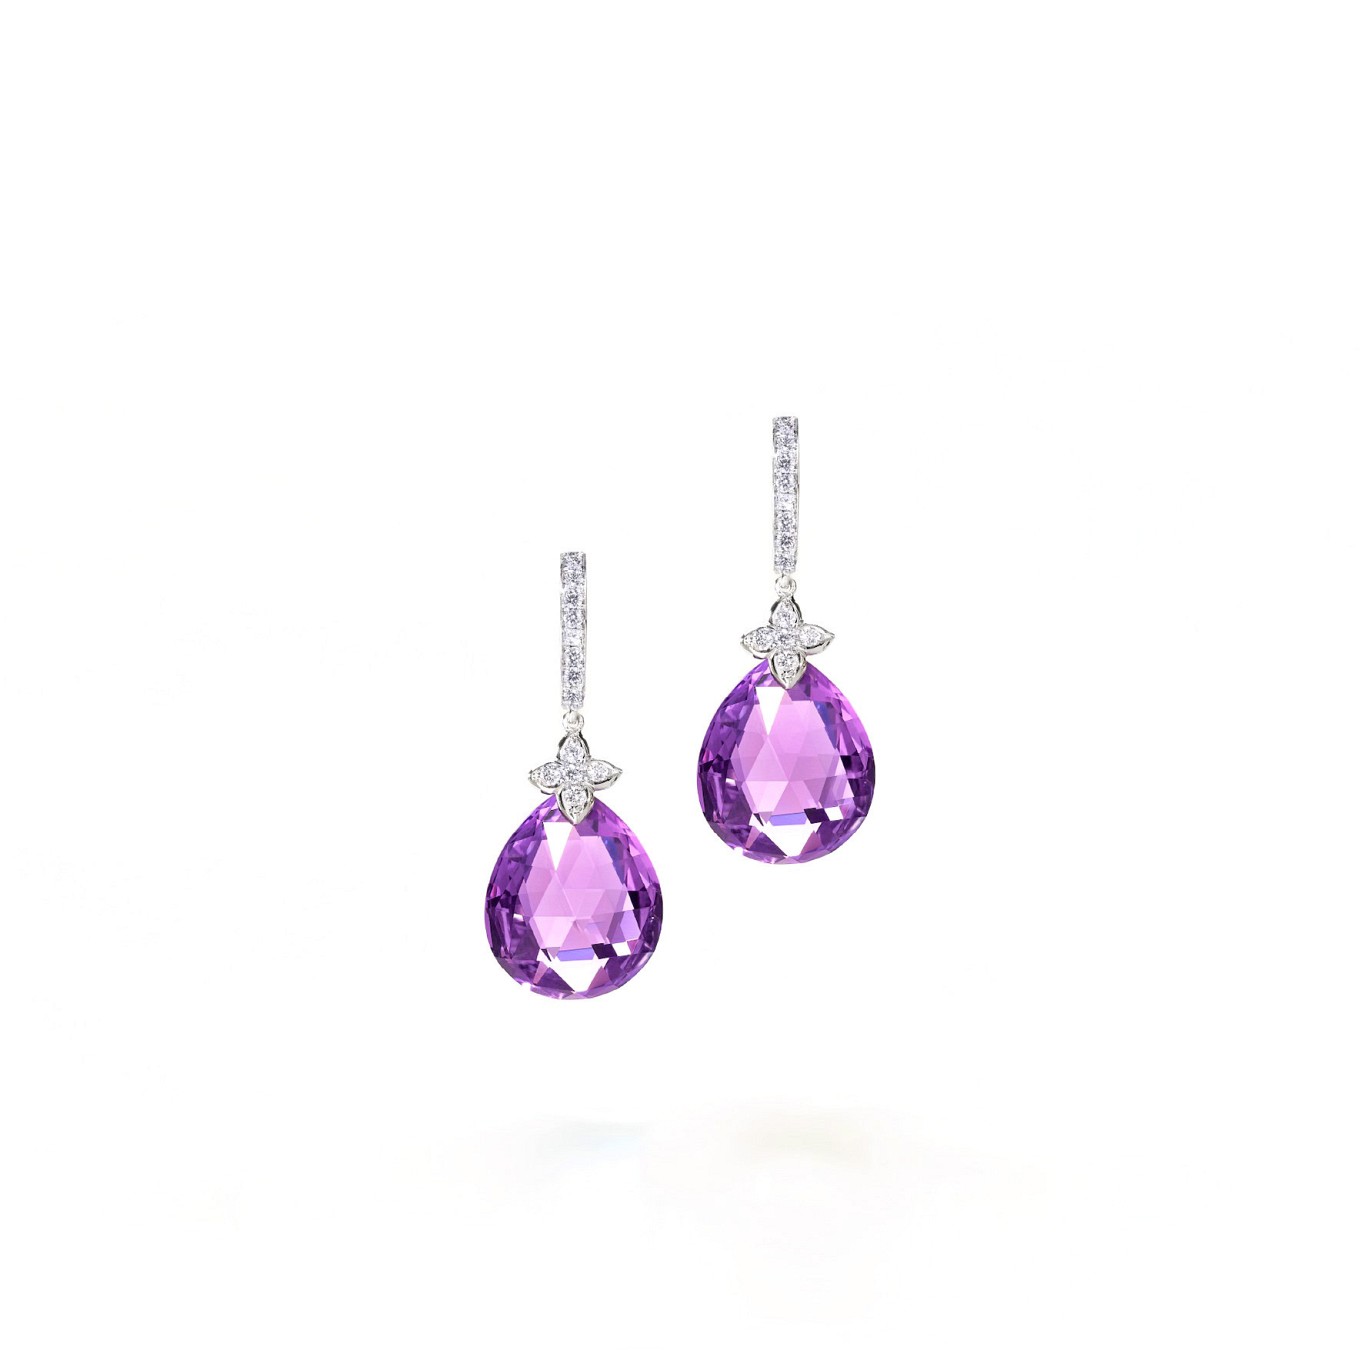 Amethyst Pear Shaped Earrings. Diamonds and white gold